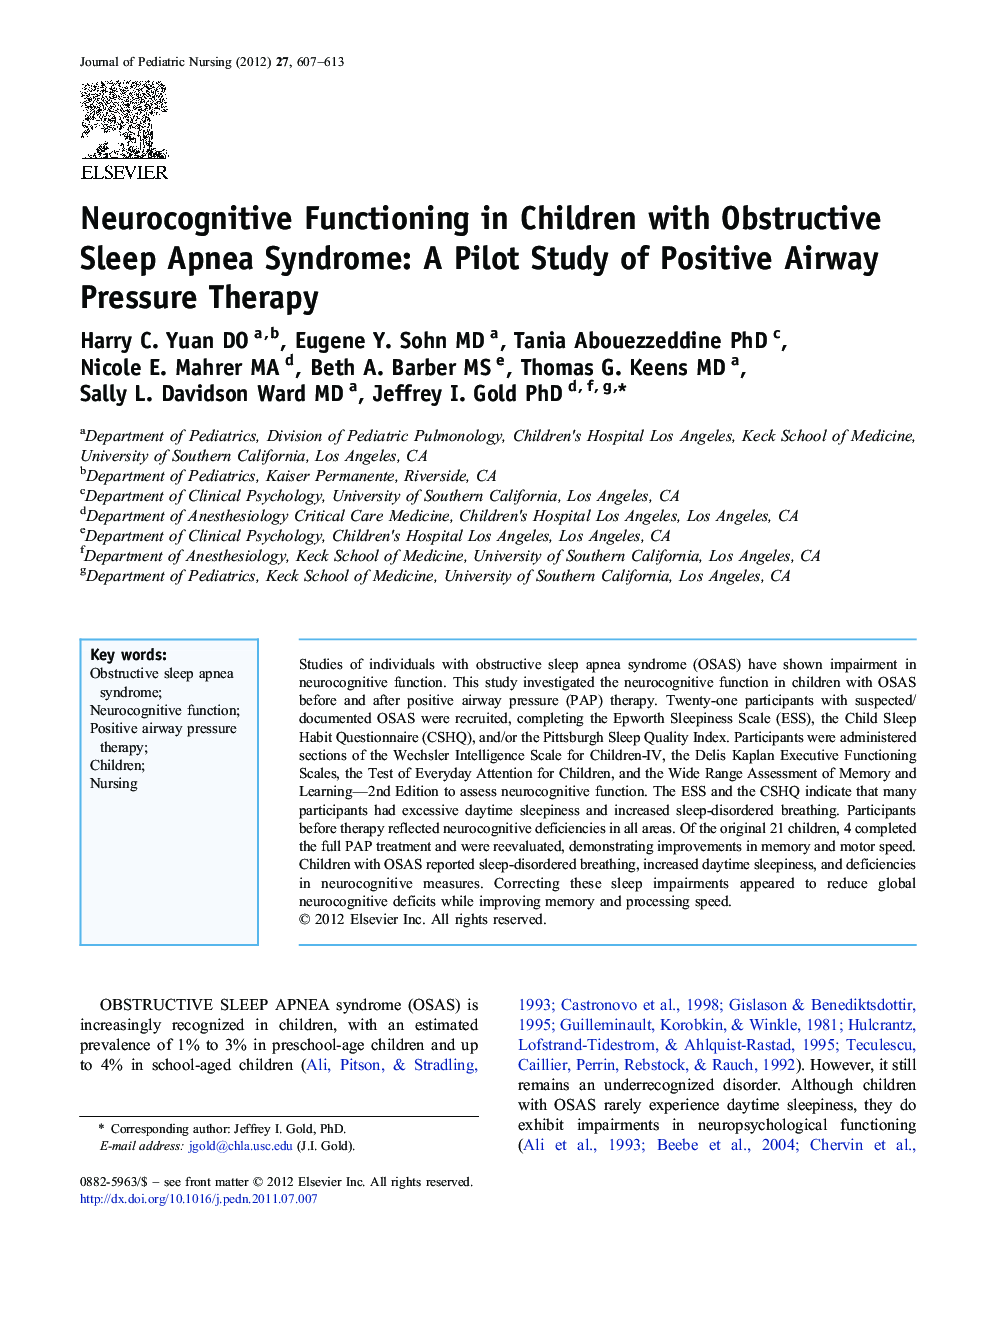 Neurocognitive Functioning in Children with Obstructive Sleep Apnea Syndrome: A Pilot Study of Positive Airway Pressure Therapy